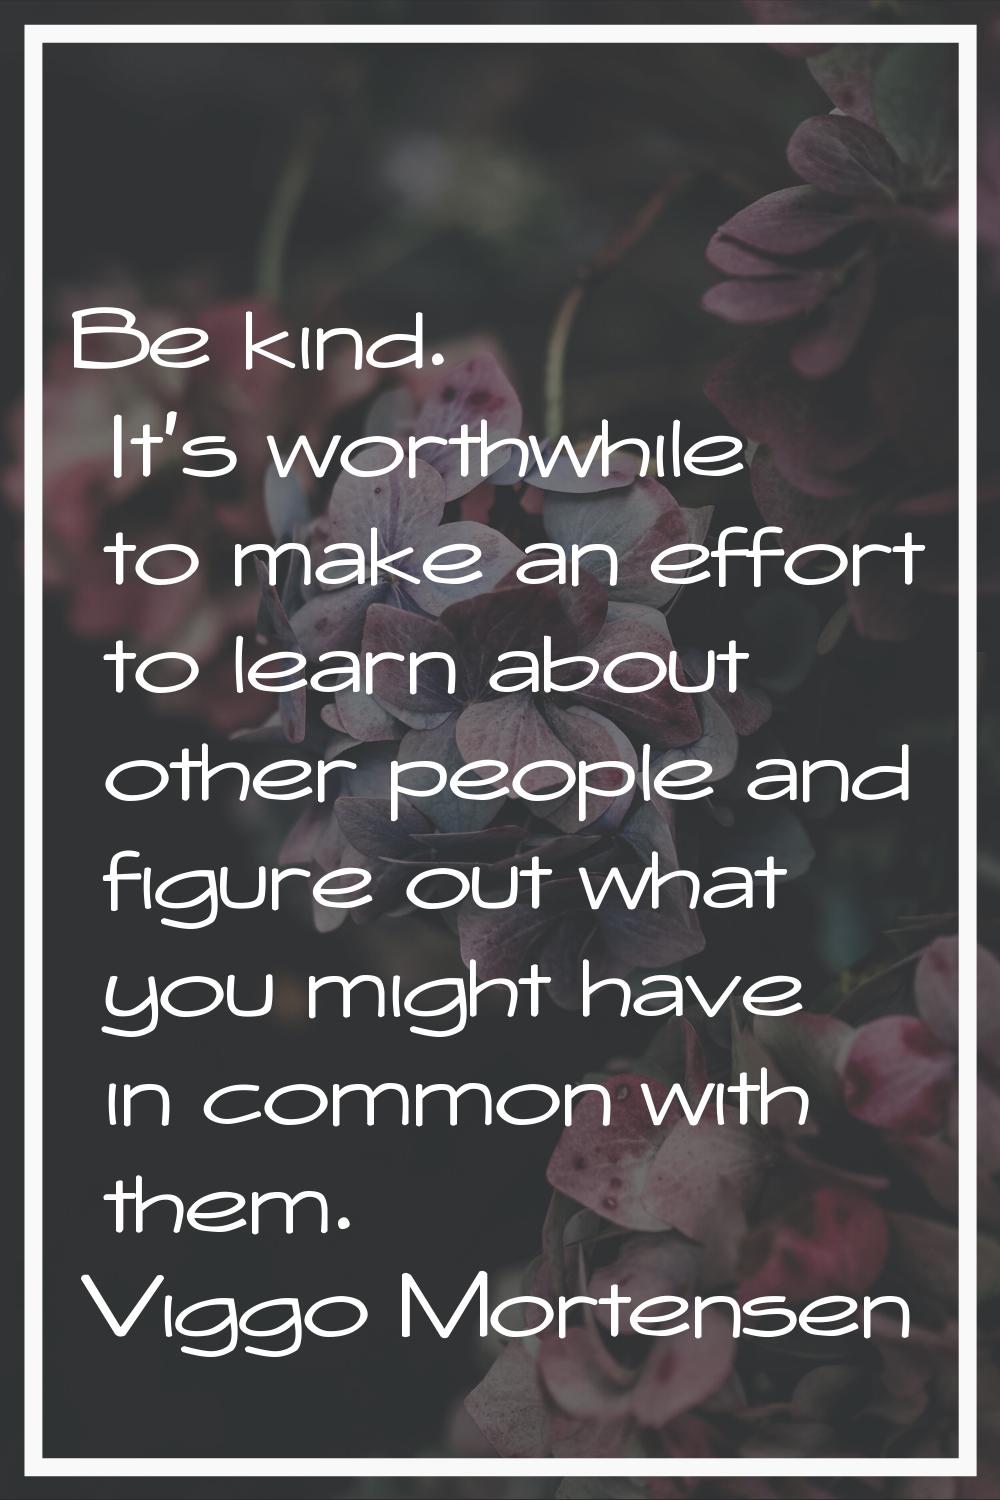 Be kind. It's worthwhile to make an effort to learn about other people and figure out what you migh